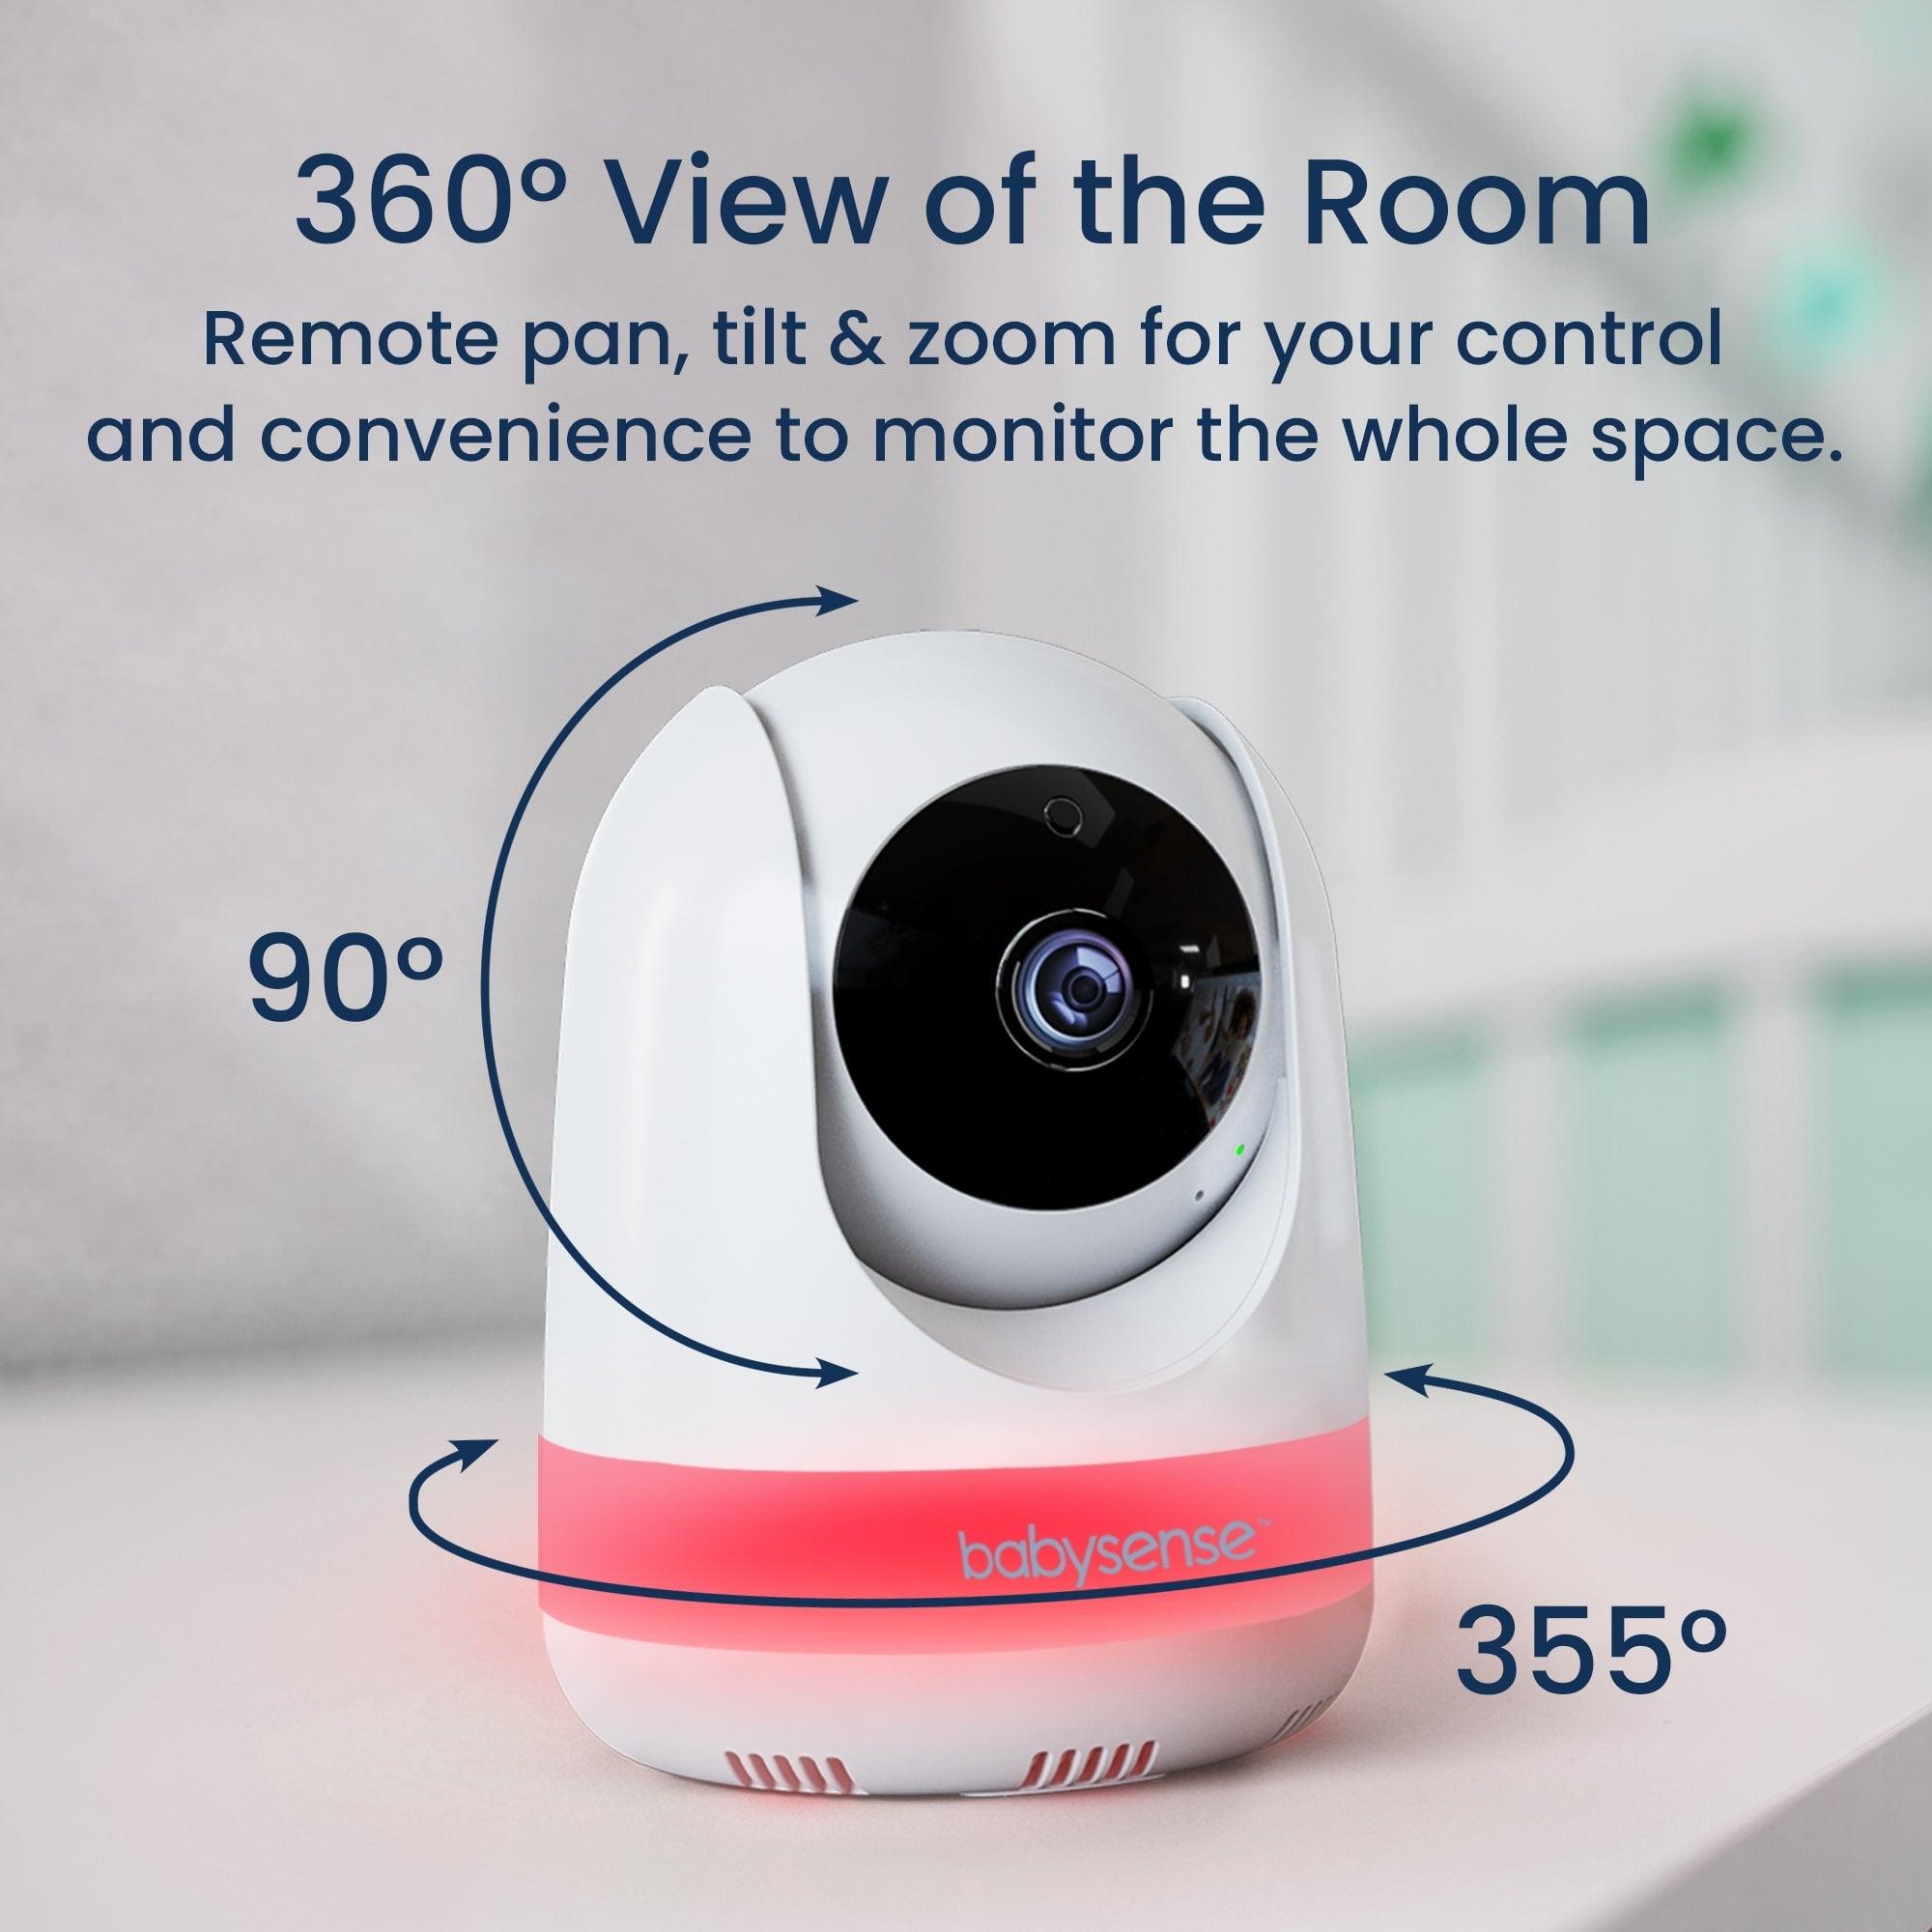 Maxview Baby Monitor 5.5 Inch 1080p Full HD, White Noise, Split-Screen with 2 Cameras